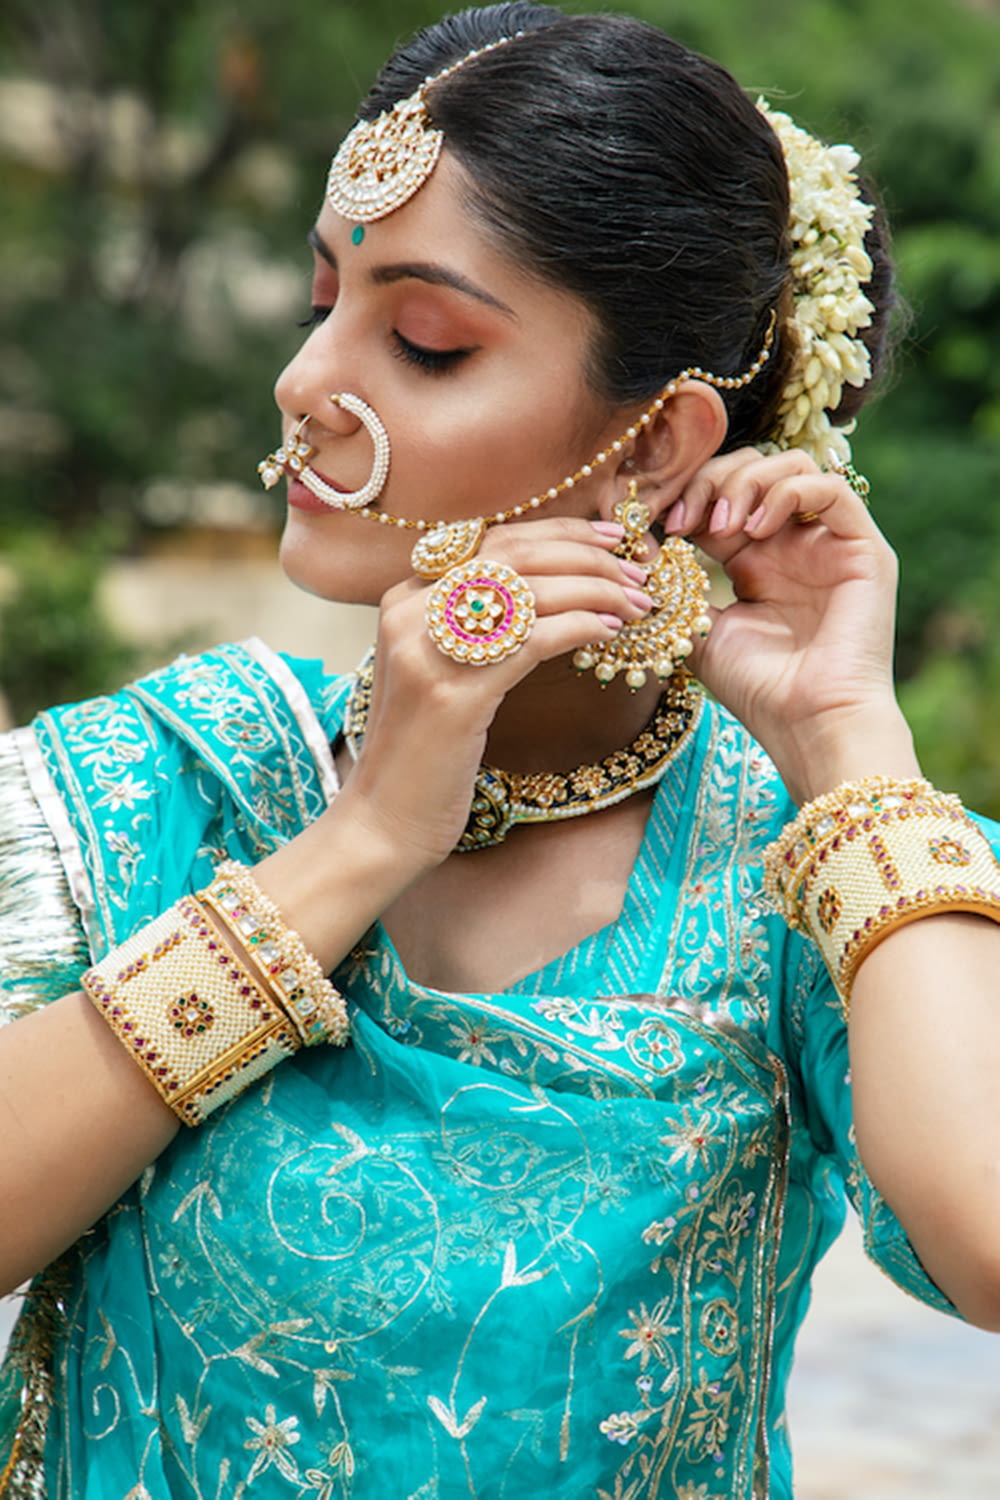 a woman in a blue sari with jewelry on her face